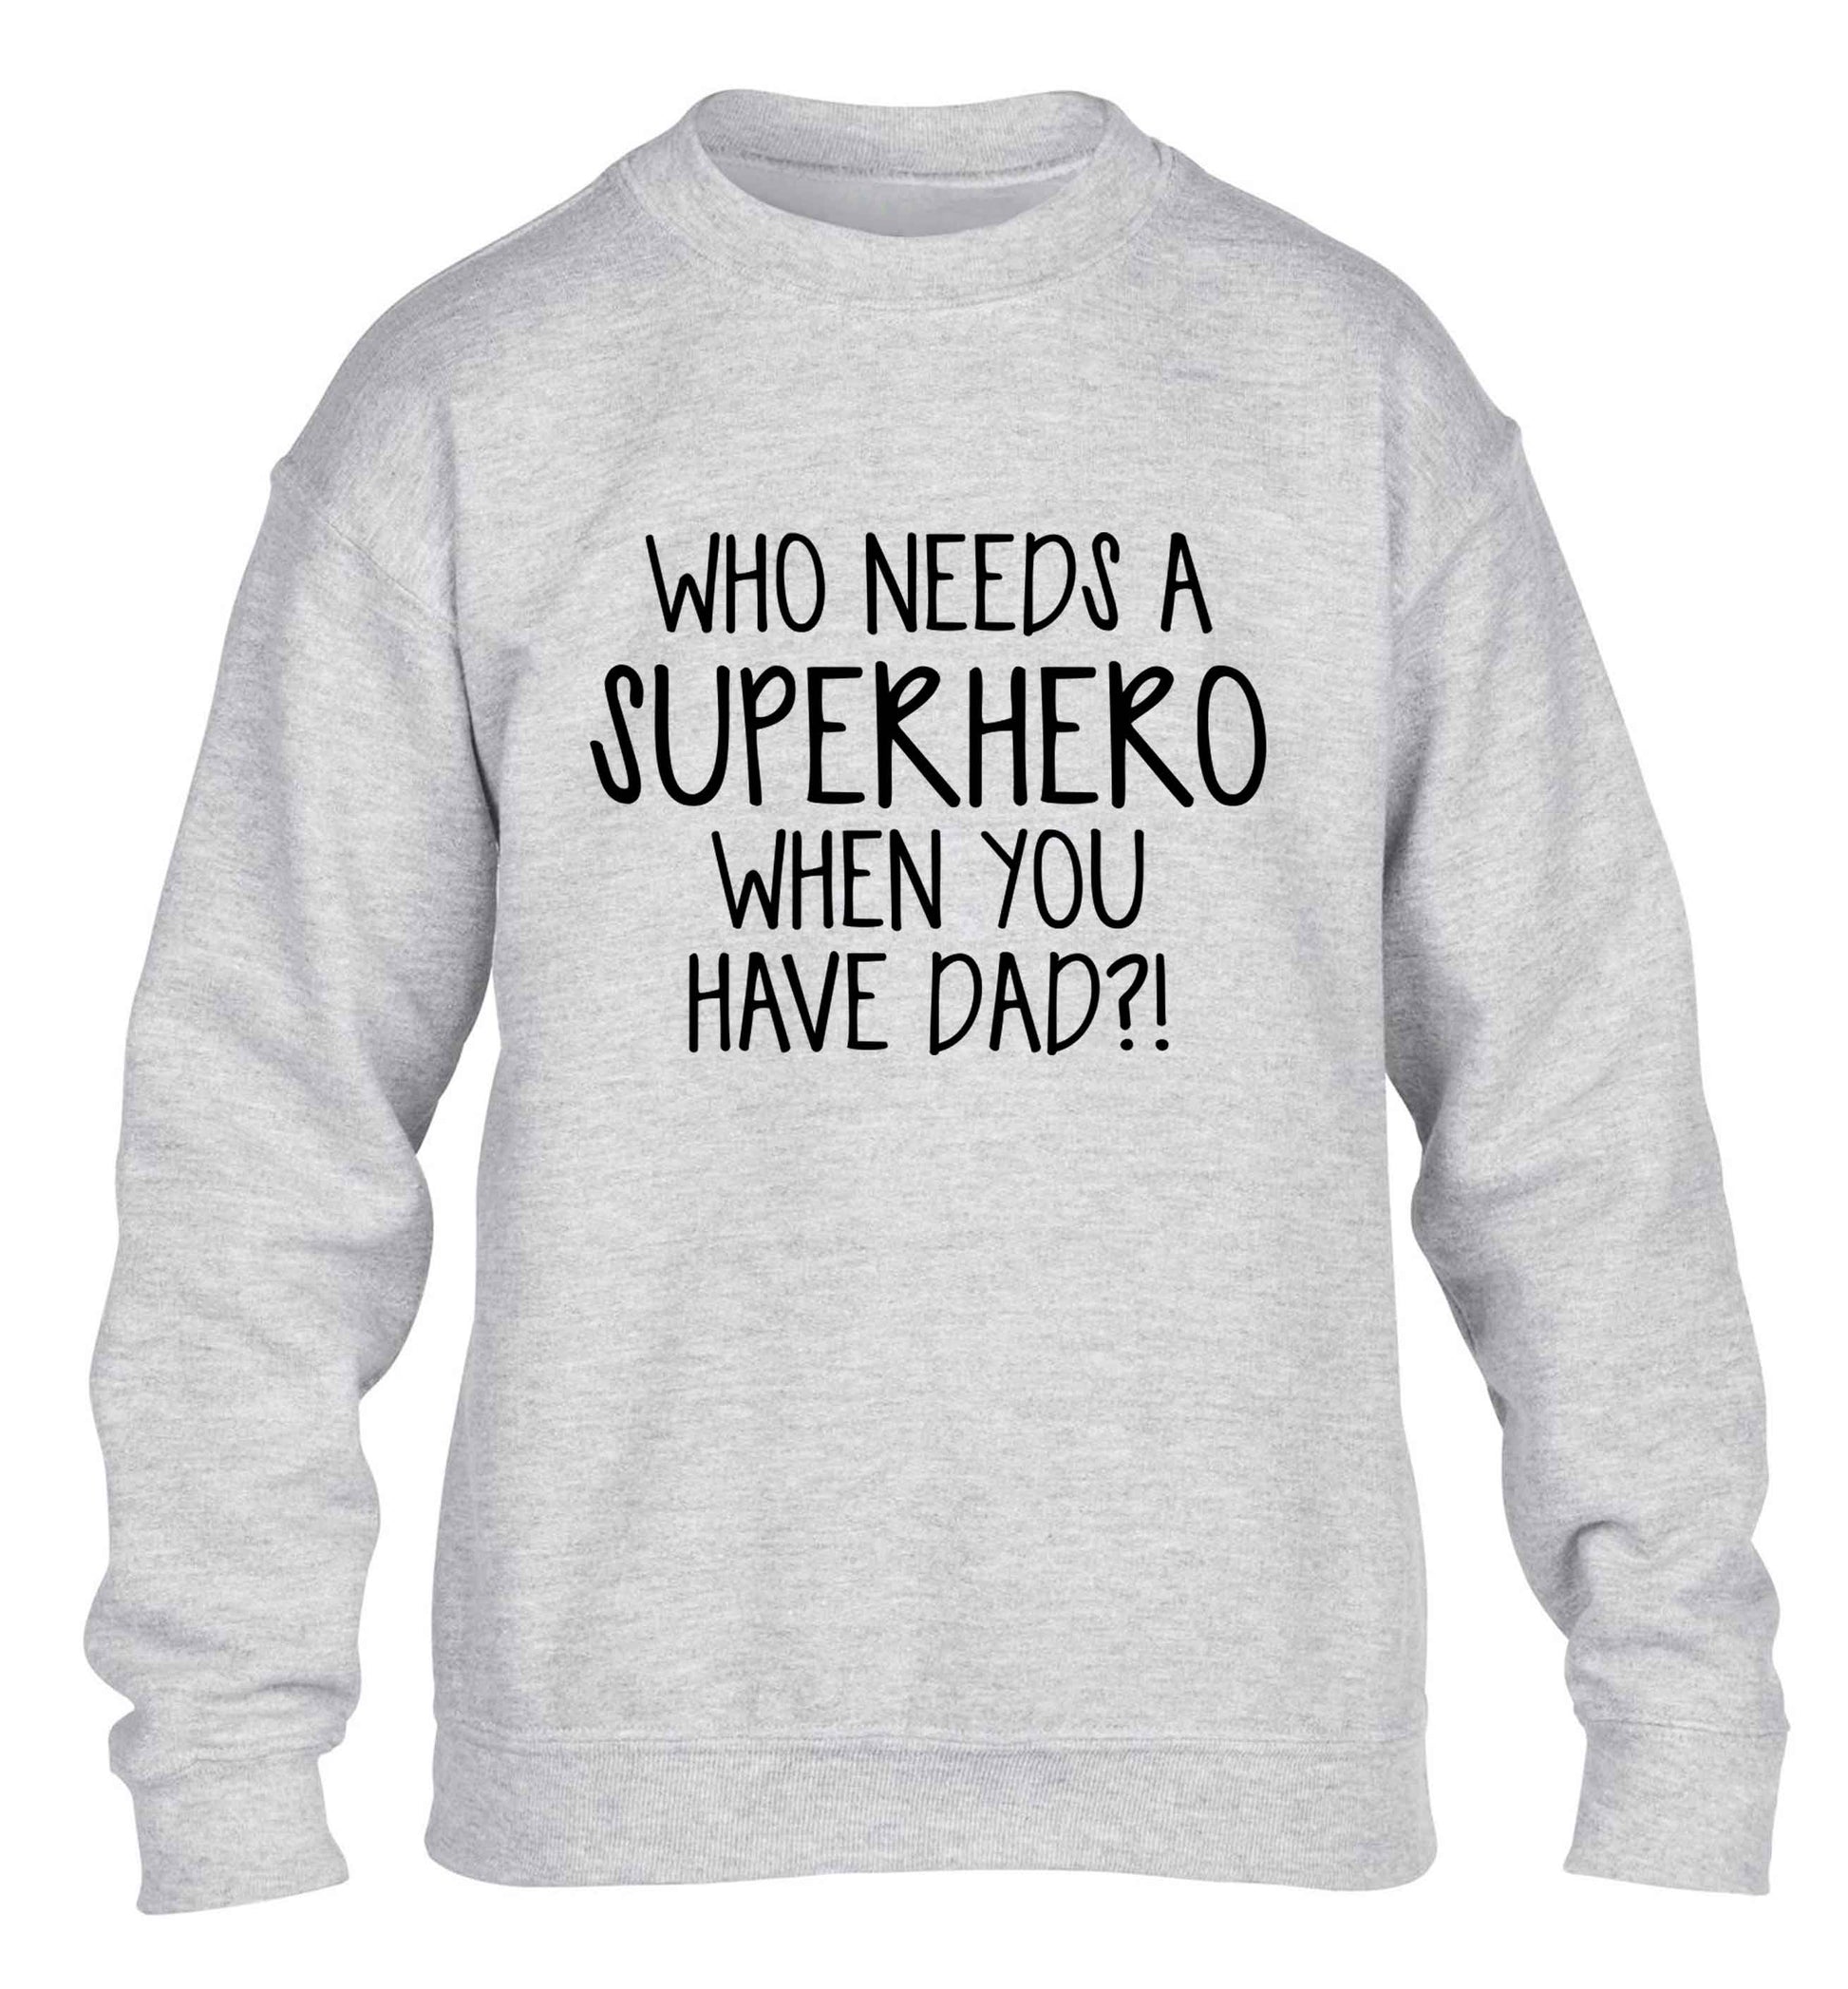 Who needs a superhero when you have dad! children's grey sweater 12-13 Years